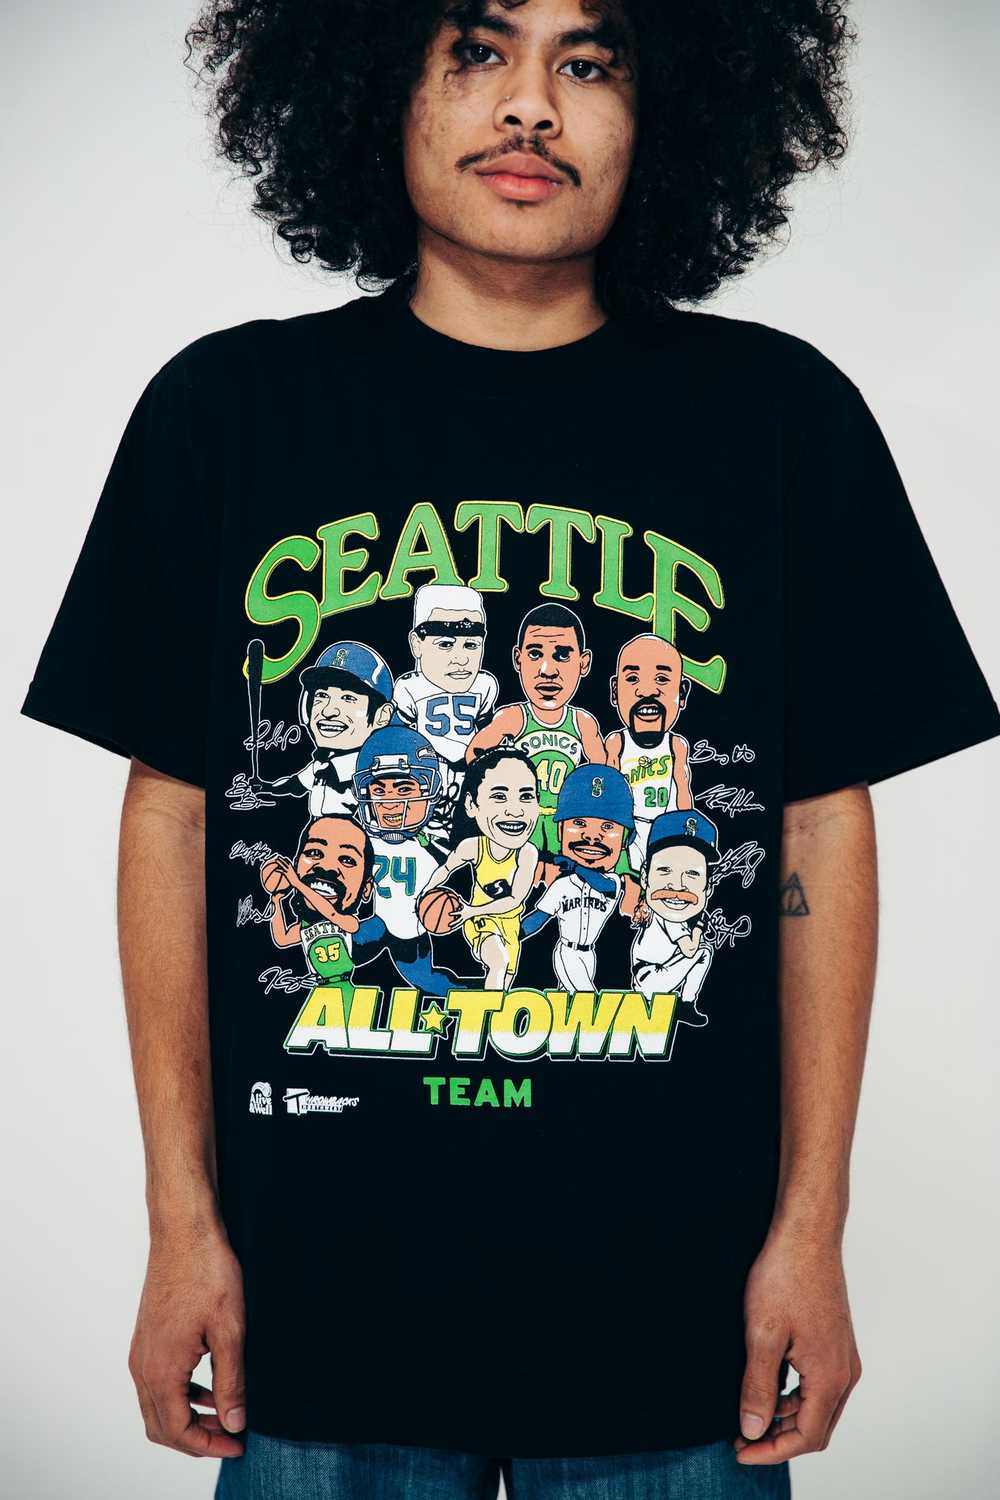 Alive & Well x TBNW "All-Town" Black Tee - image 1